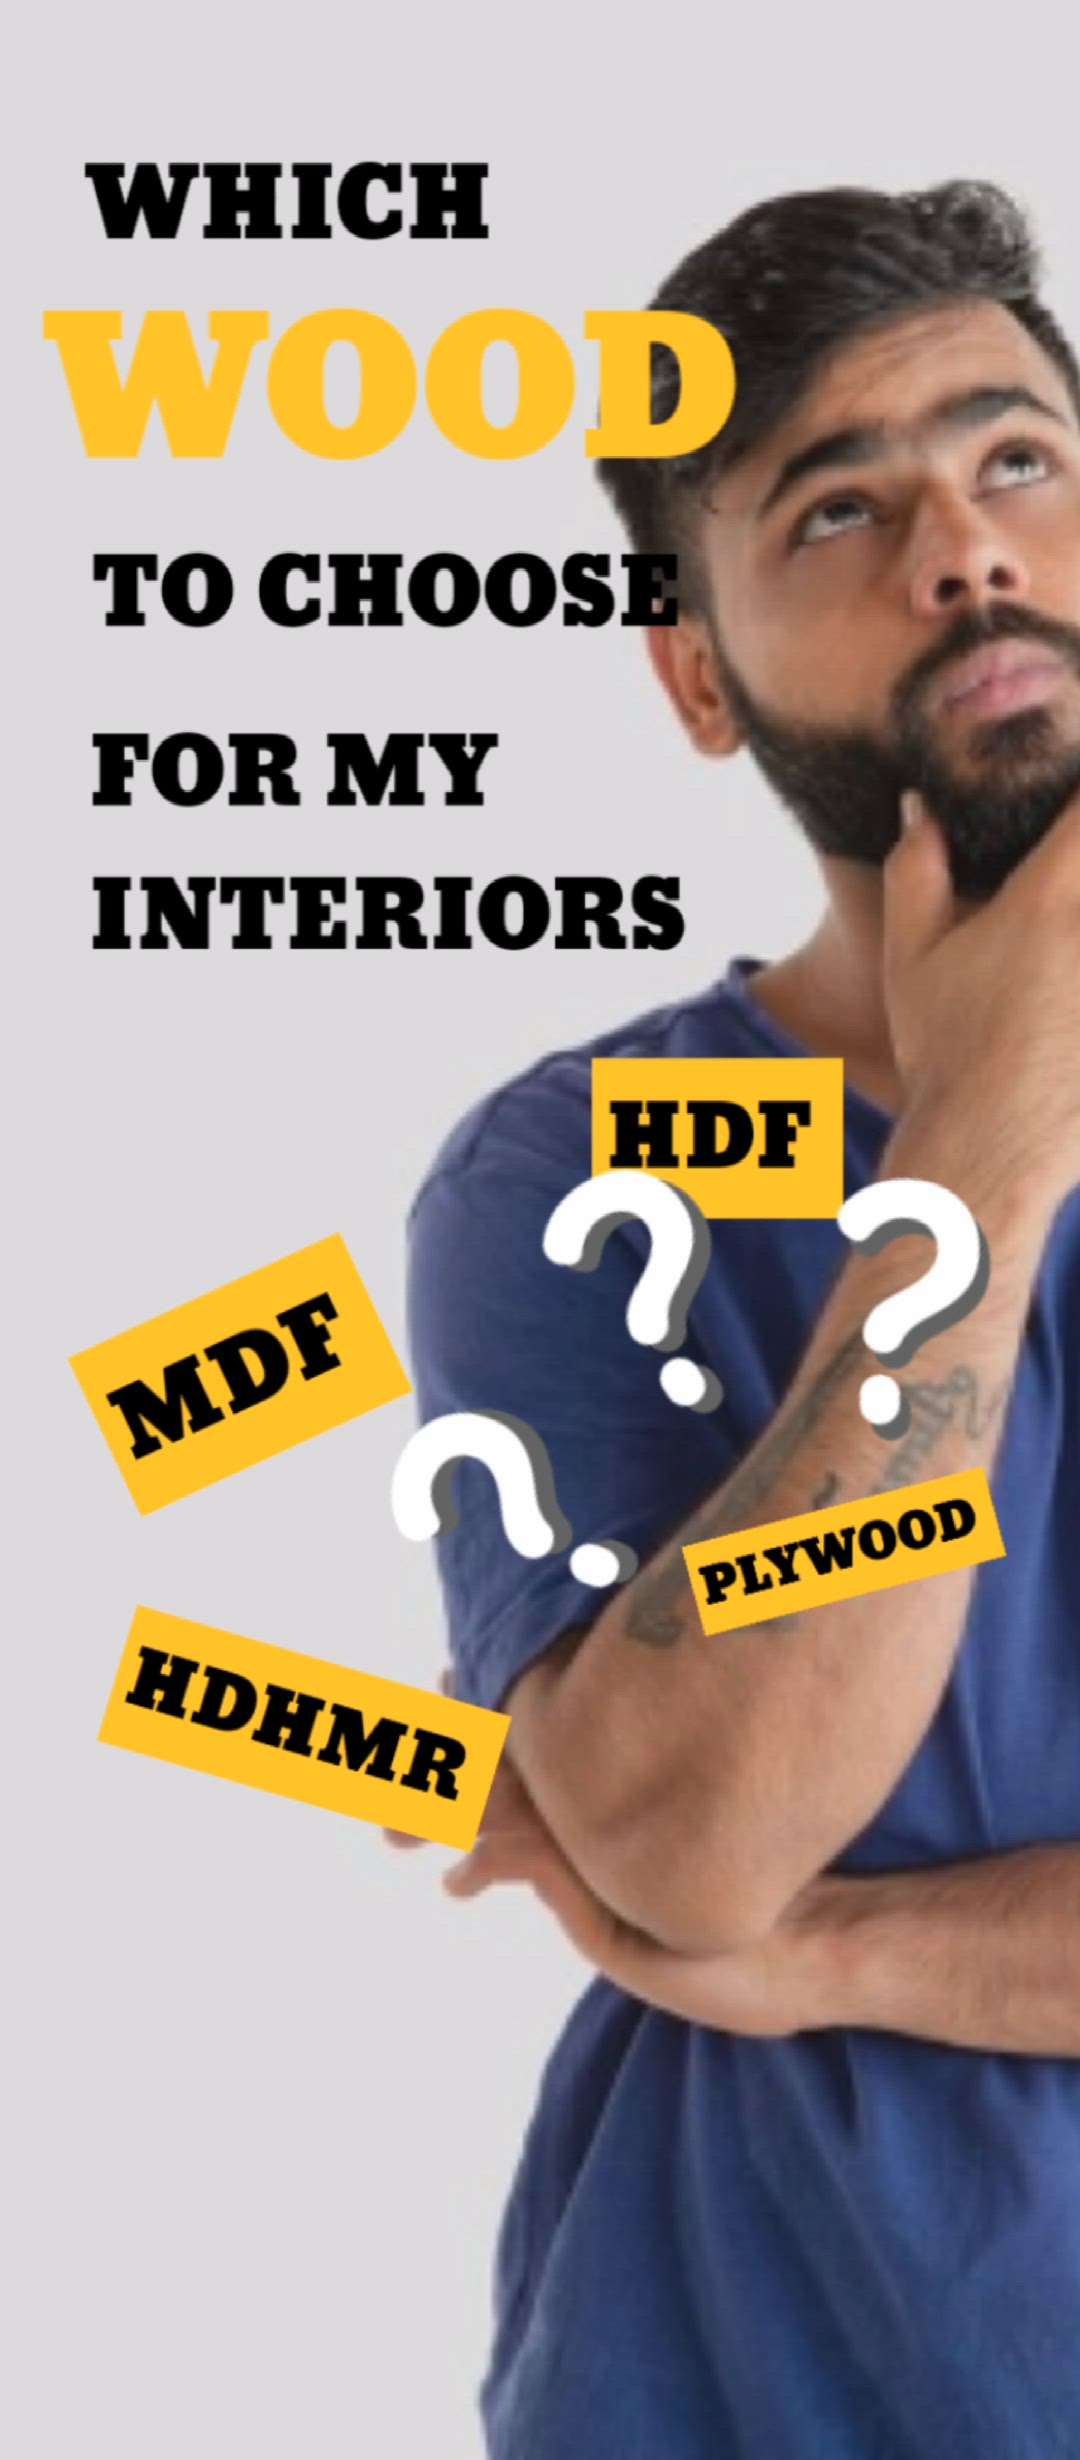 Which wood option should I choose for my interiors???   

 #engineeredwood  #interiordecor #MDFBoard #mdf #hdf #Plywood #HDHMR #budgethomes #woodencabinets